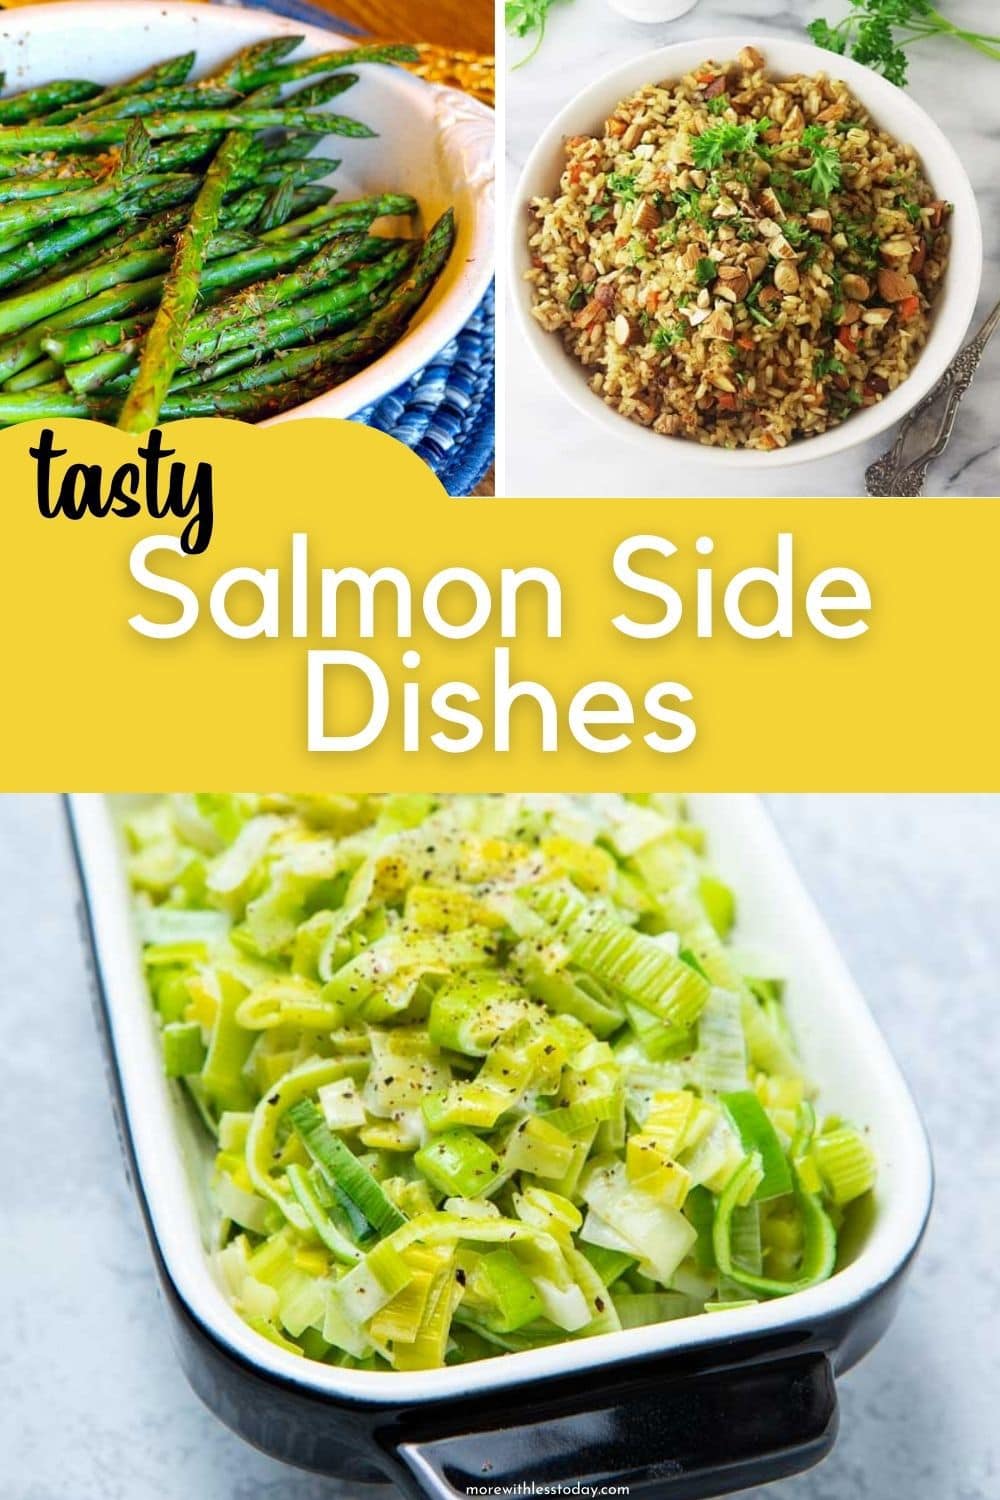 Salmon Side Dishes - Best Side Dishes That Are Great With Salmon - More